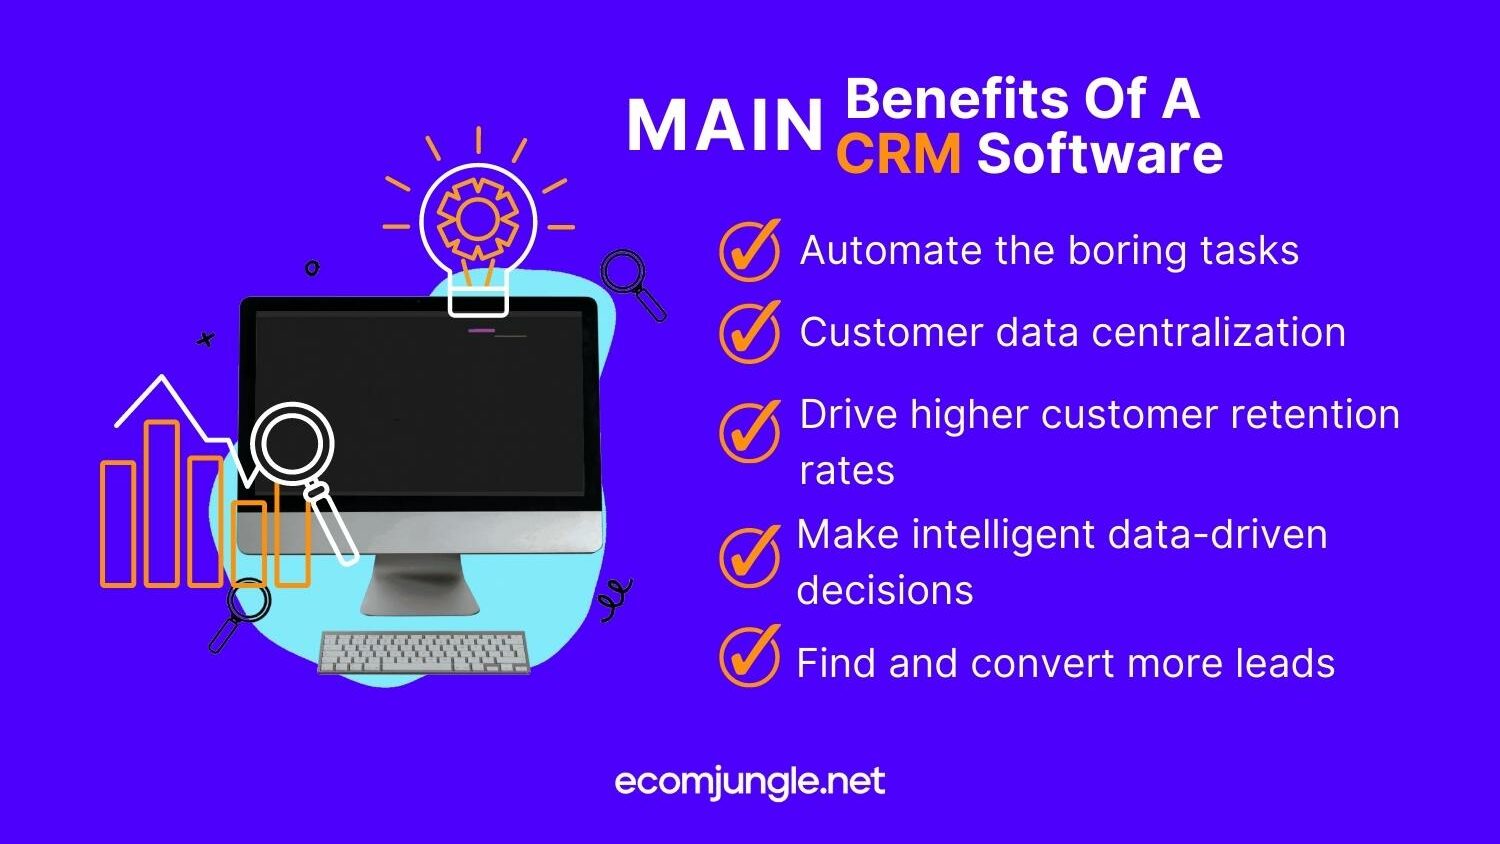 There are a lot of benefits of using crm, for example, automate boring tasks, find and convert more leads.